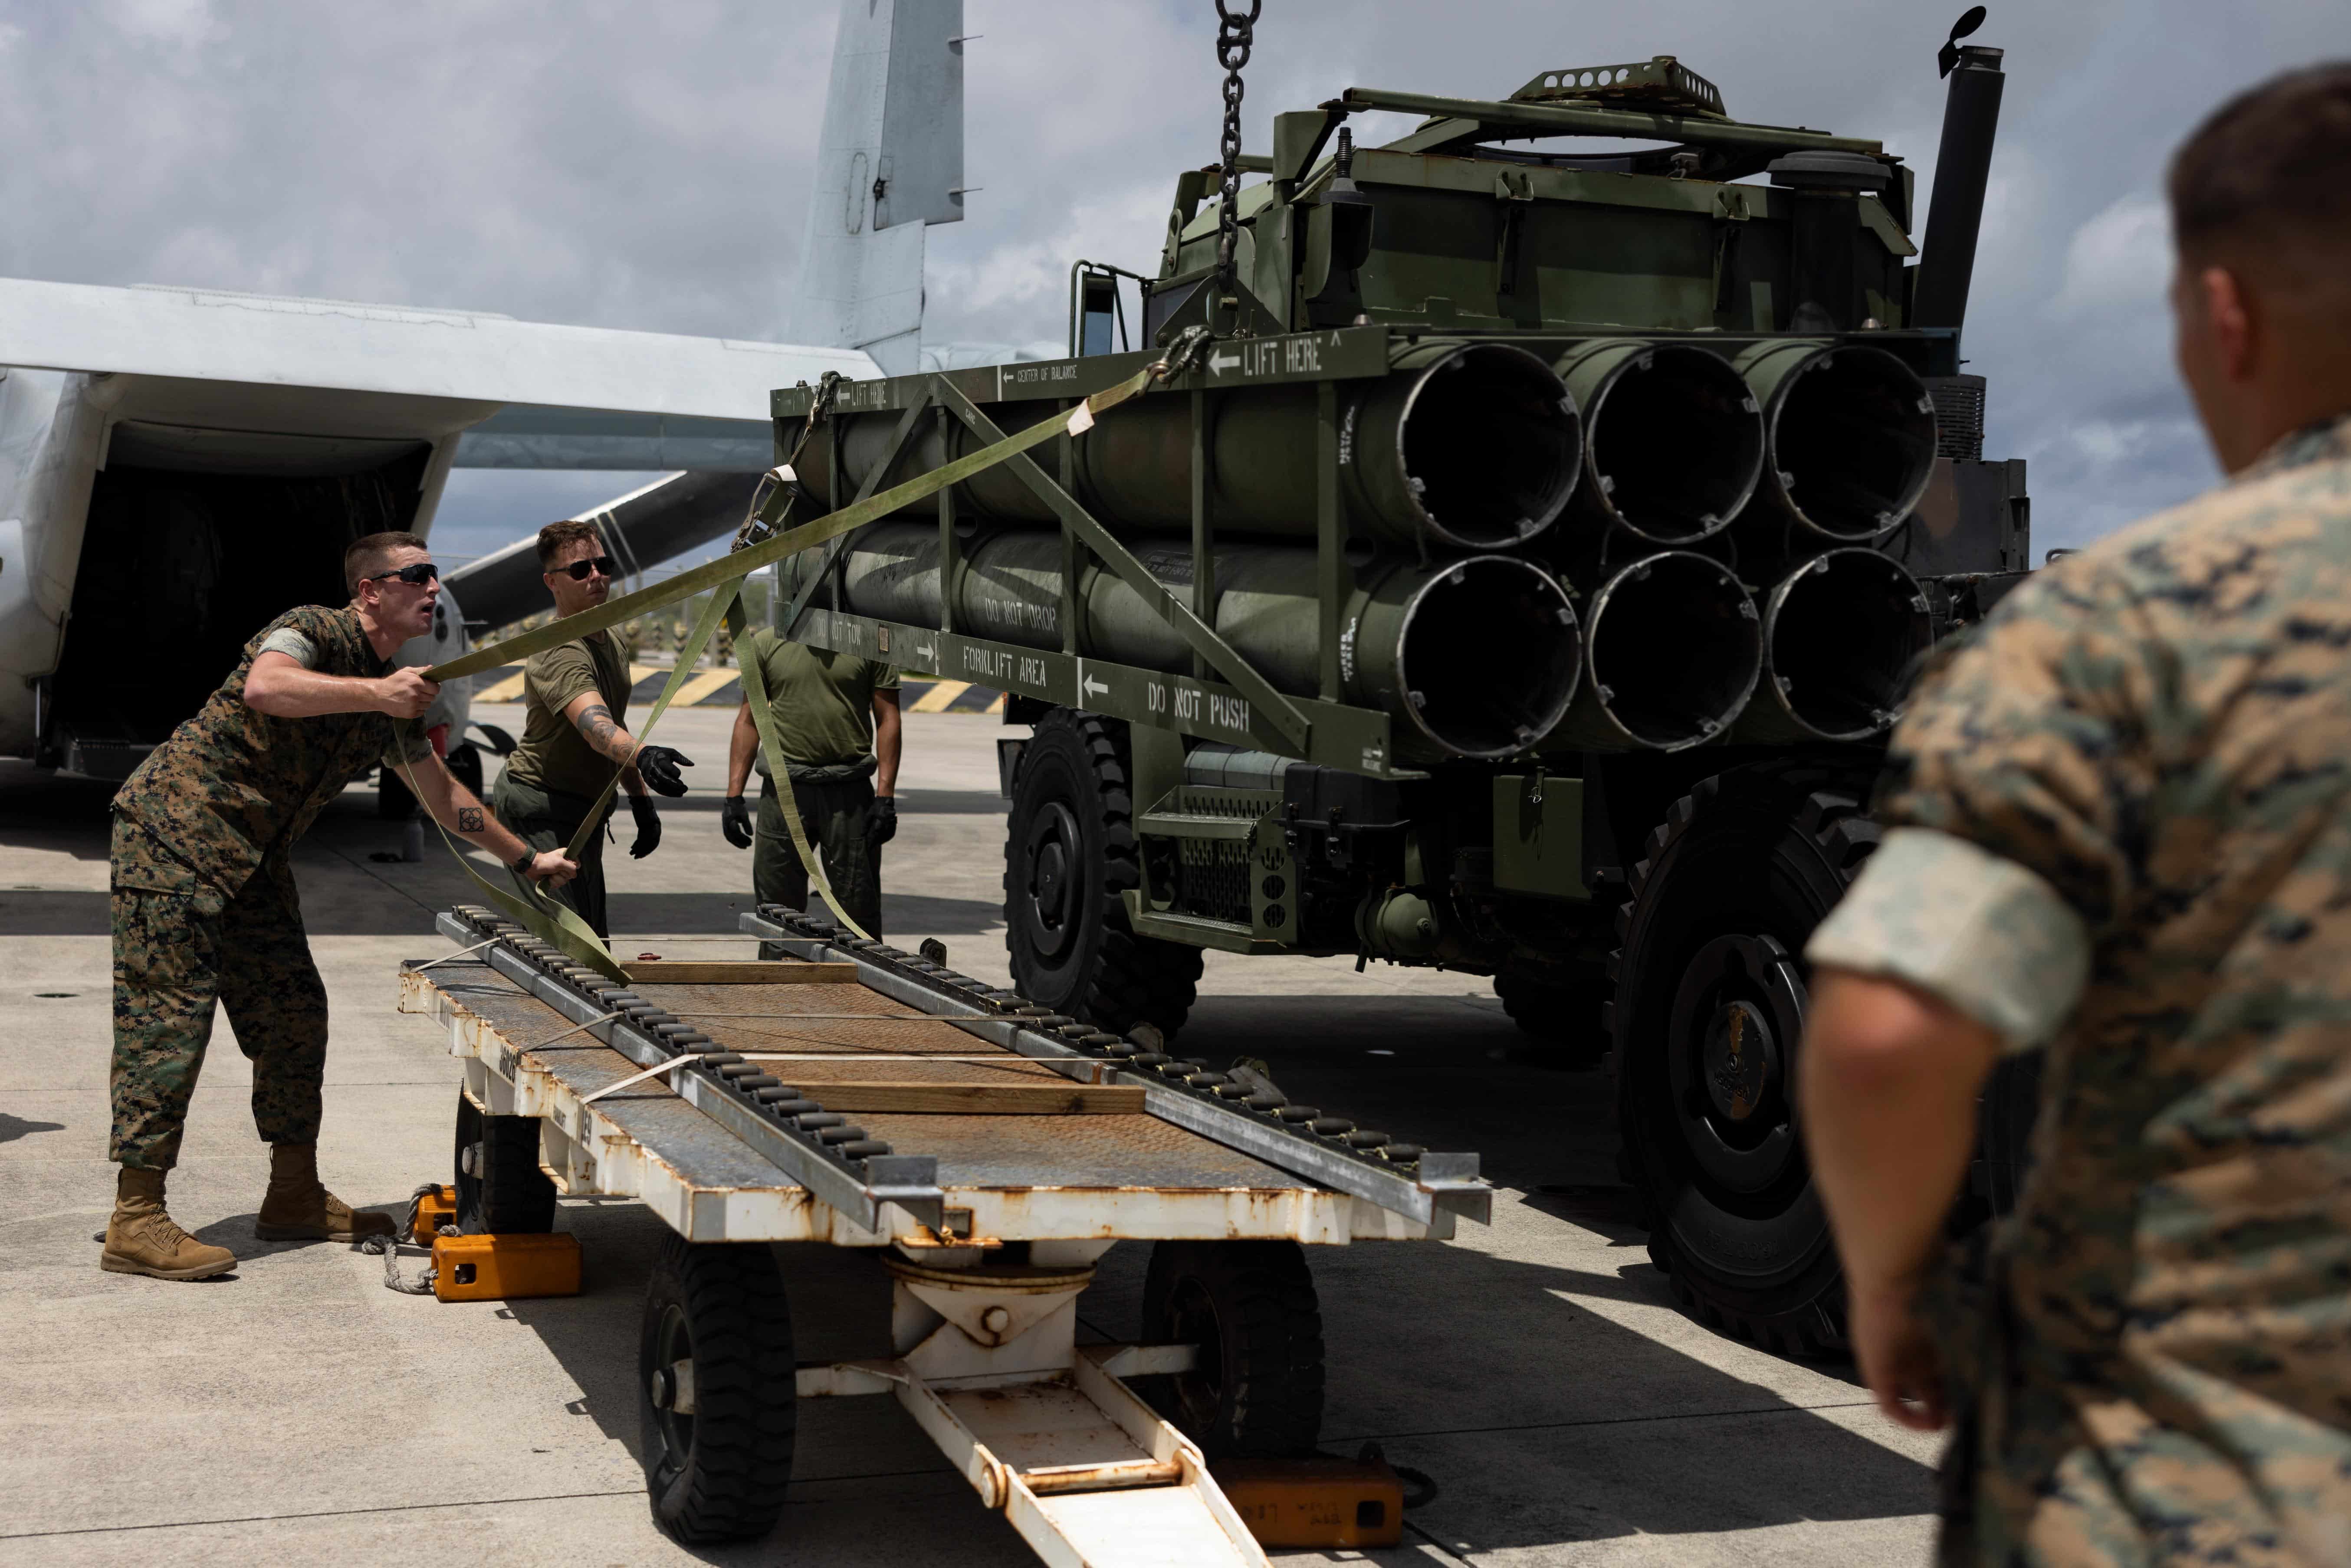 U.S. Marines with Marine Medium Tiltrotor Squadron (VMM) 265, 1st Marine Aircraft Wing, and 3rd Battalion, 12th Marines, test a prototype loading system, which allows the High Mobility Artillery Rocket System (HIMARS) launch pod to be loaded into the back of an MV-22B Osprey